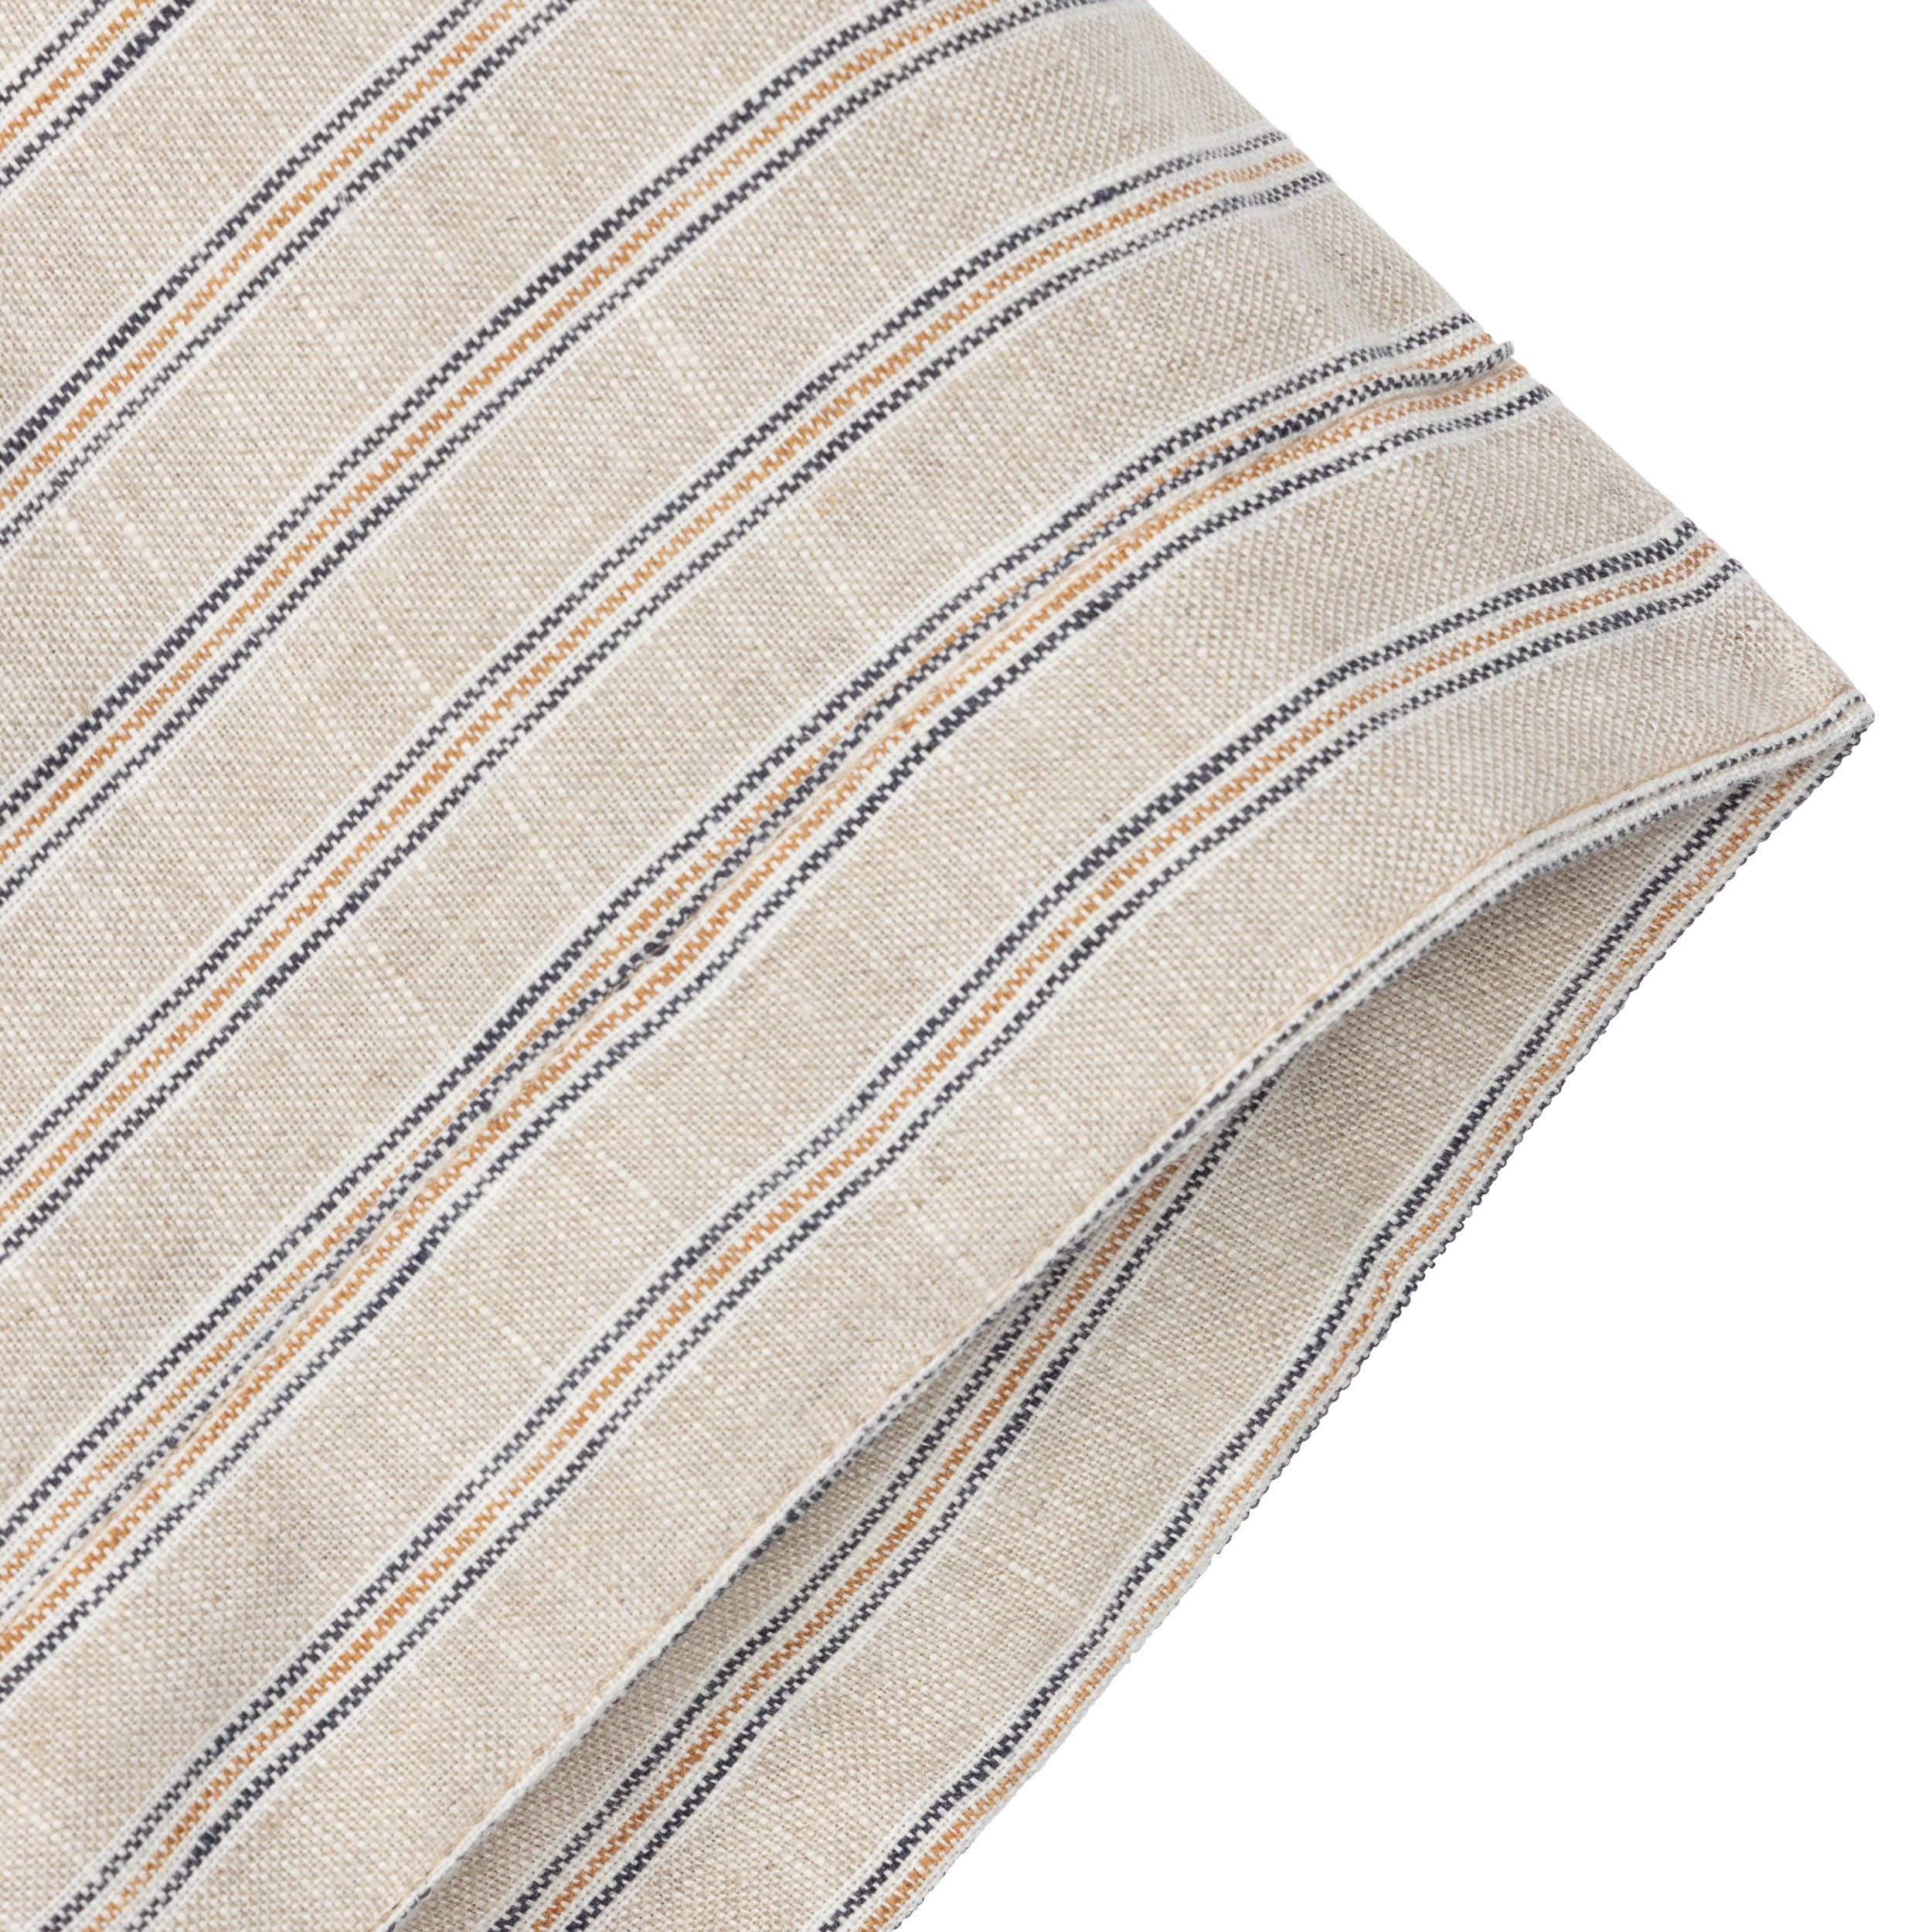 Carrier Company Dish Dash in Striped Linen